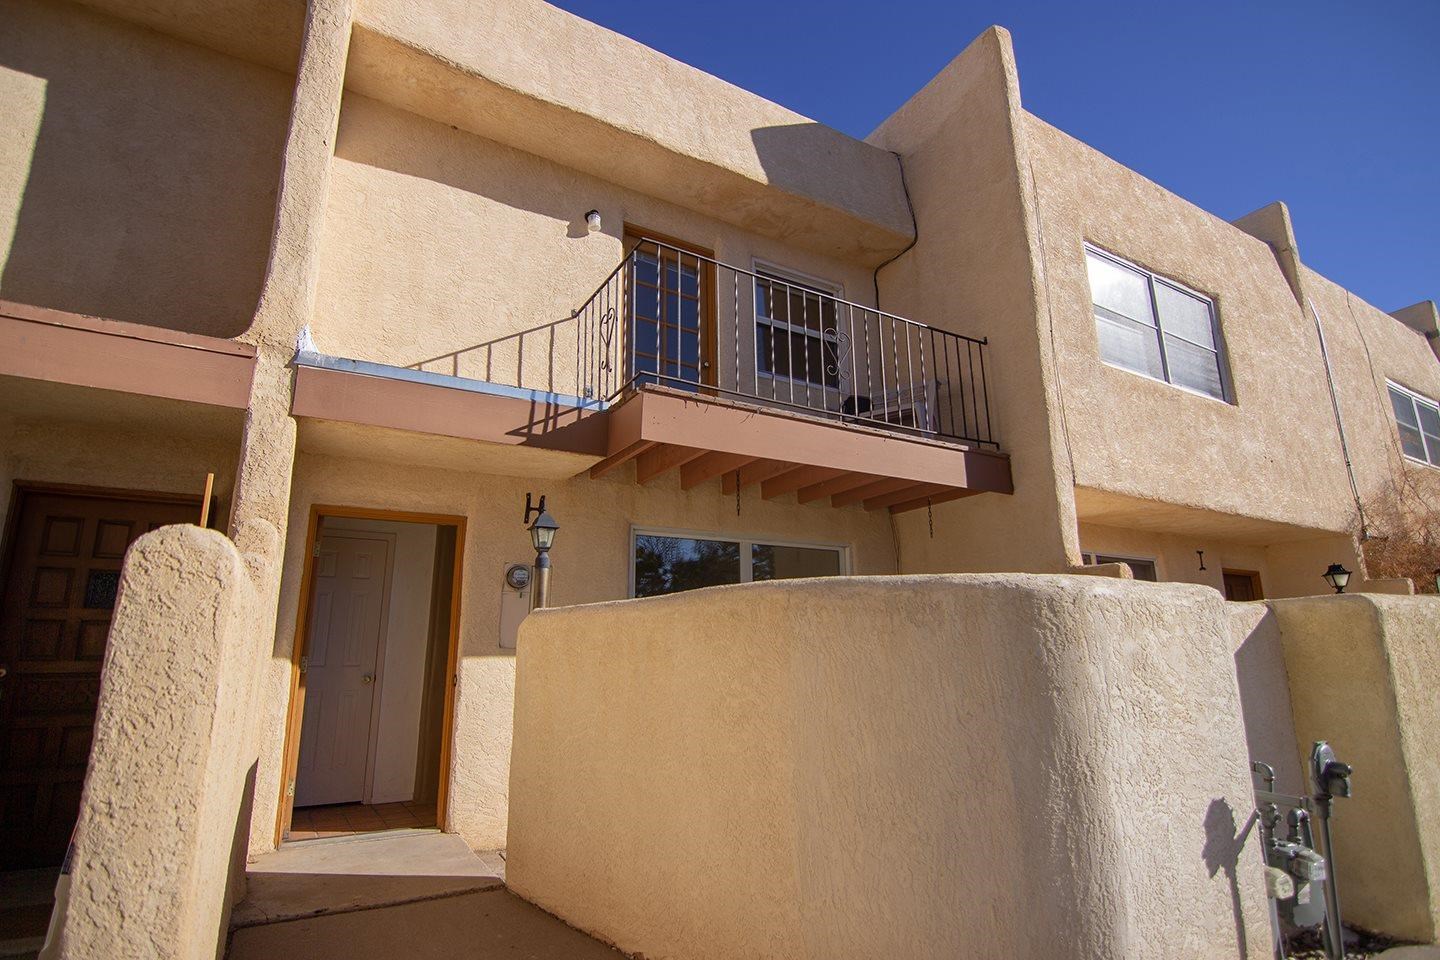 1333 PACHECO H, Santa Fe, New Mexico 87505, 2 Bedrooms Bedrooms, ,3 BathroomsBathrooms,Residential,For Sale,1333 PACHECO H,202101709